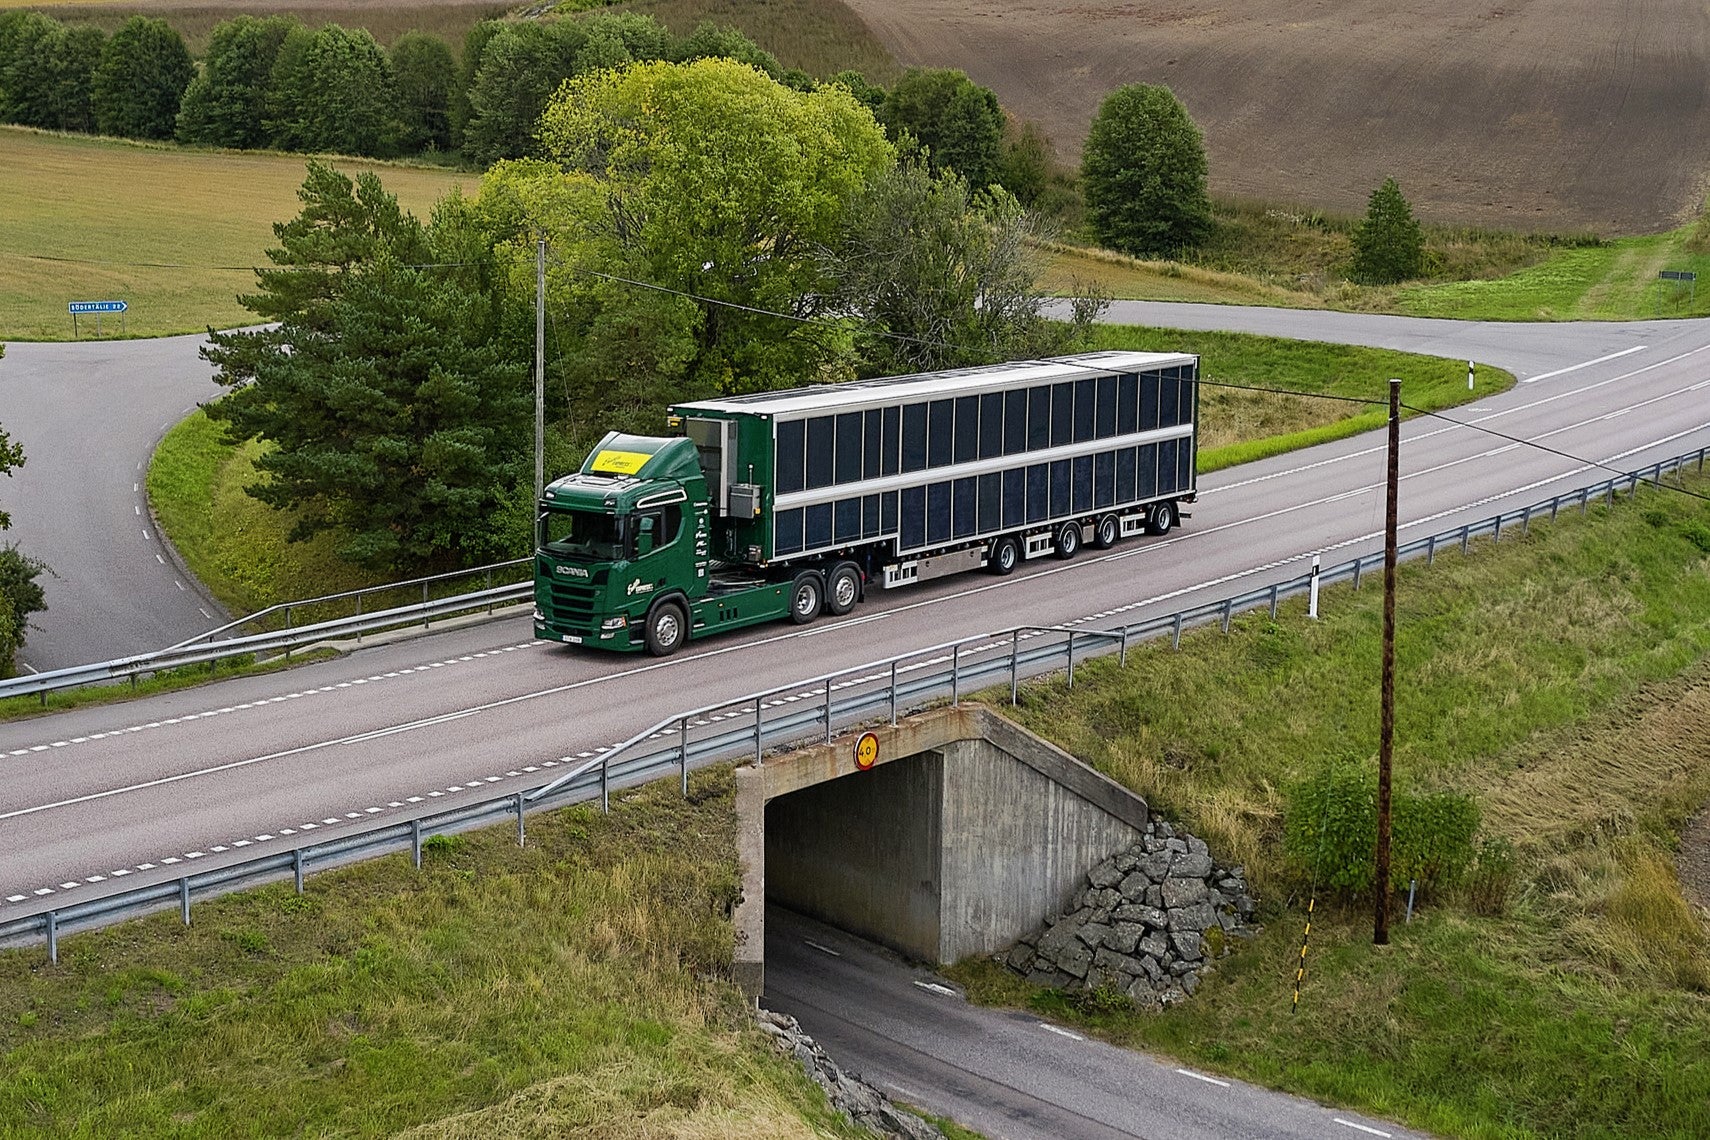 Scania is testing the world’s first hybrid truck with a solar panel covered trailer on public roads in Sweden